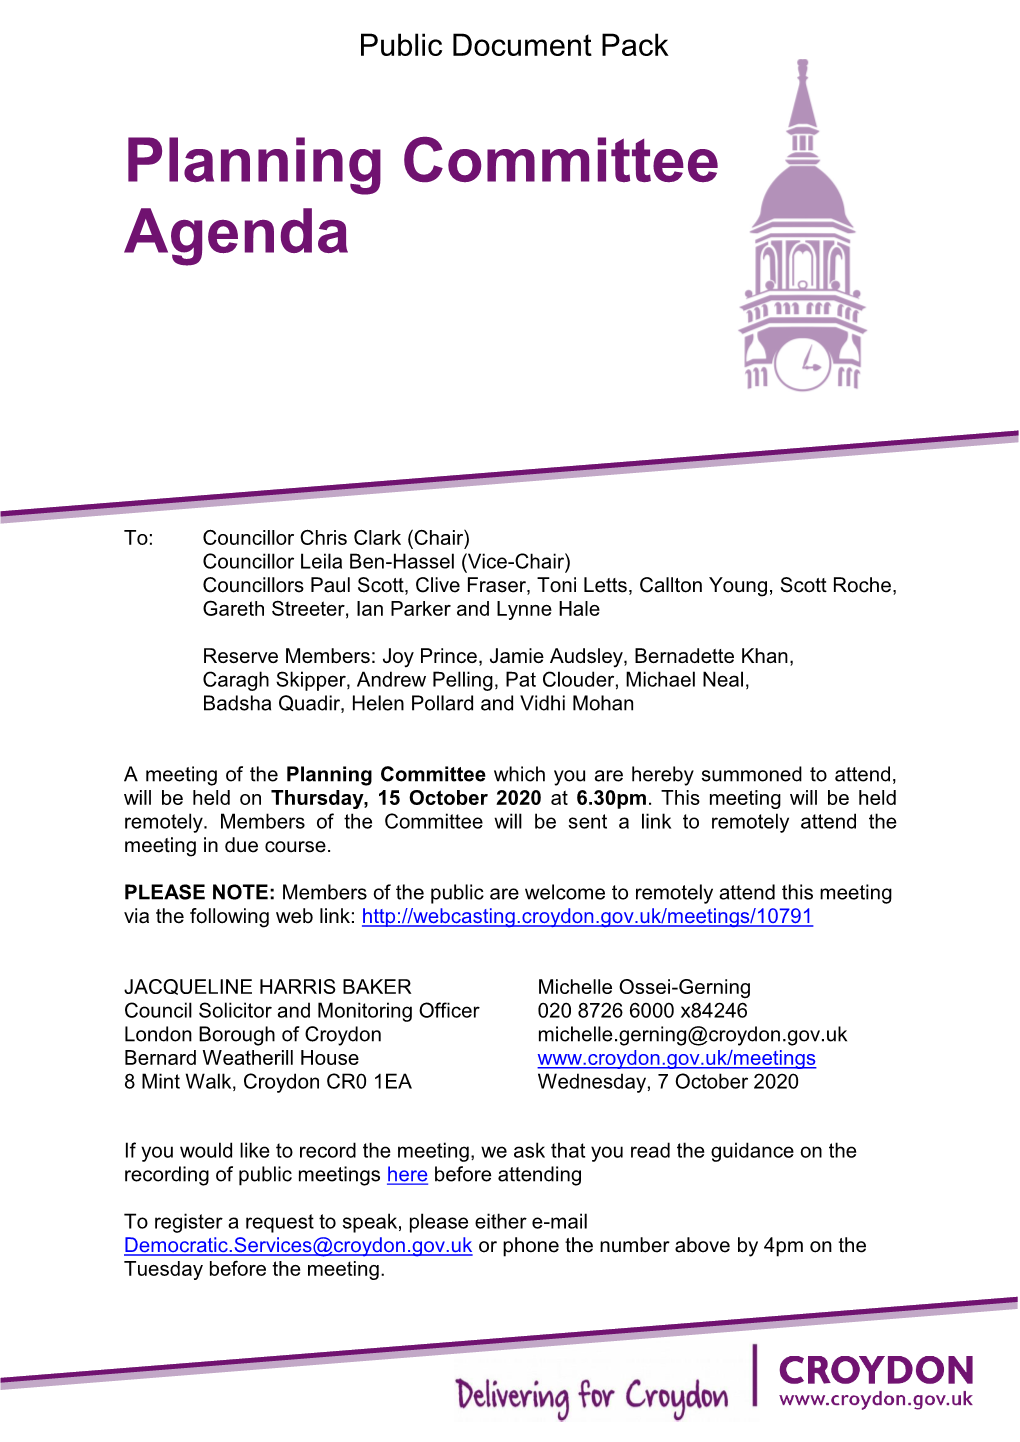 (Public Pack)Agenda Document for Planning Committee, 15/10/2020